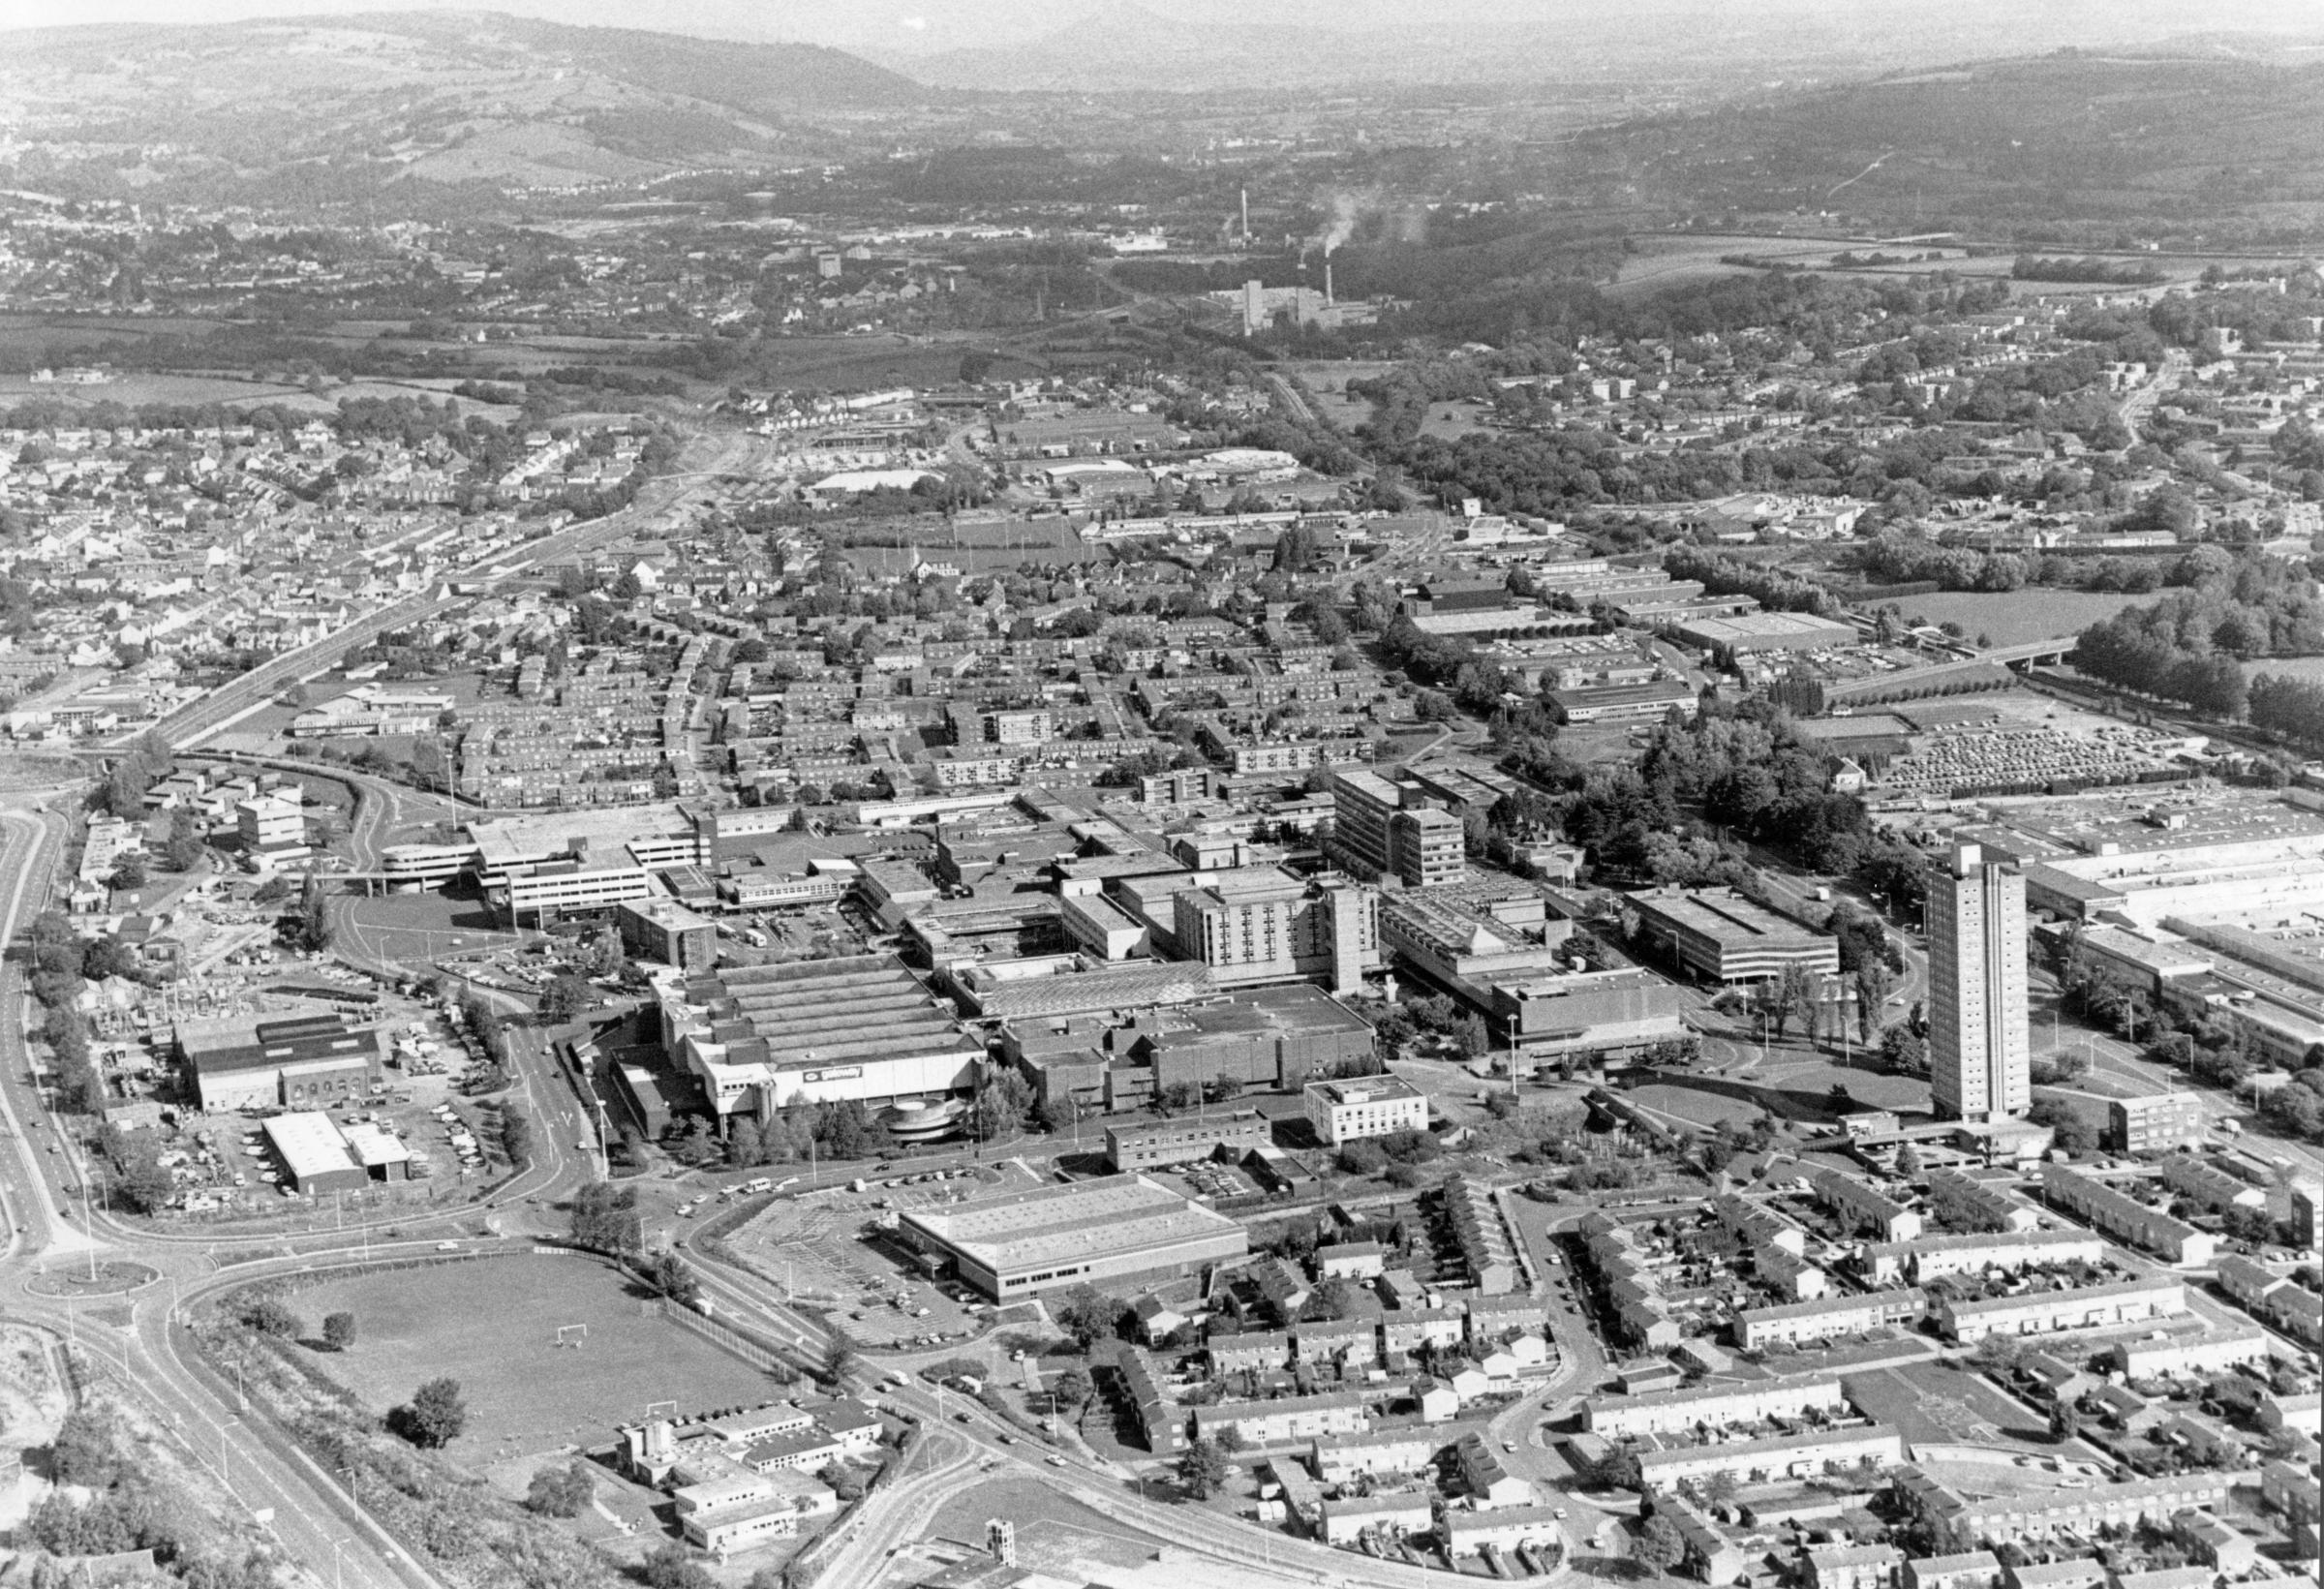 A view from above Cwmbran in 1989